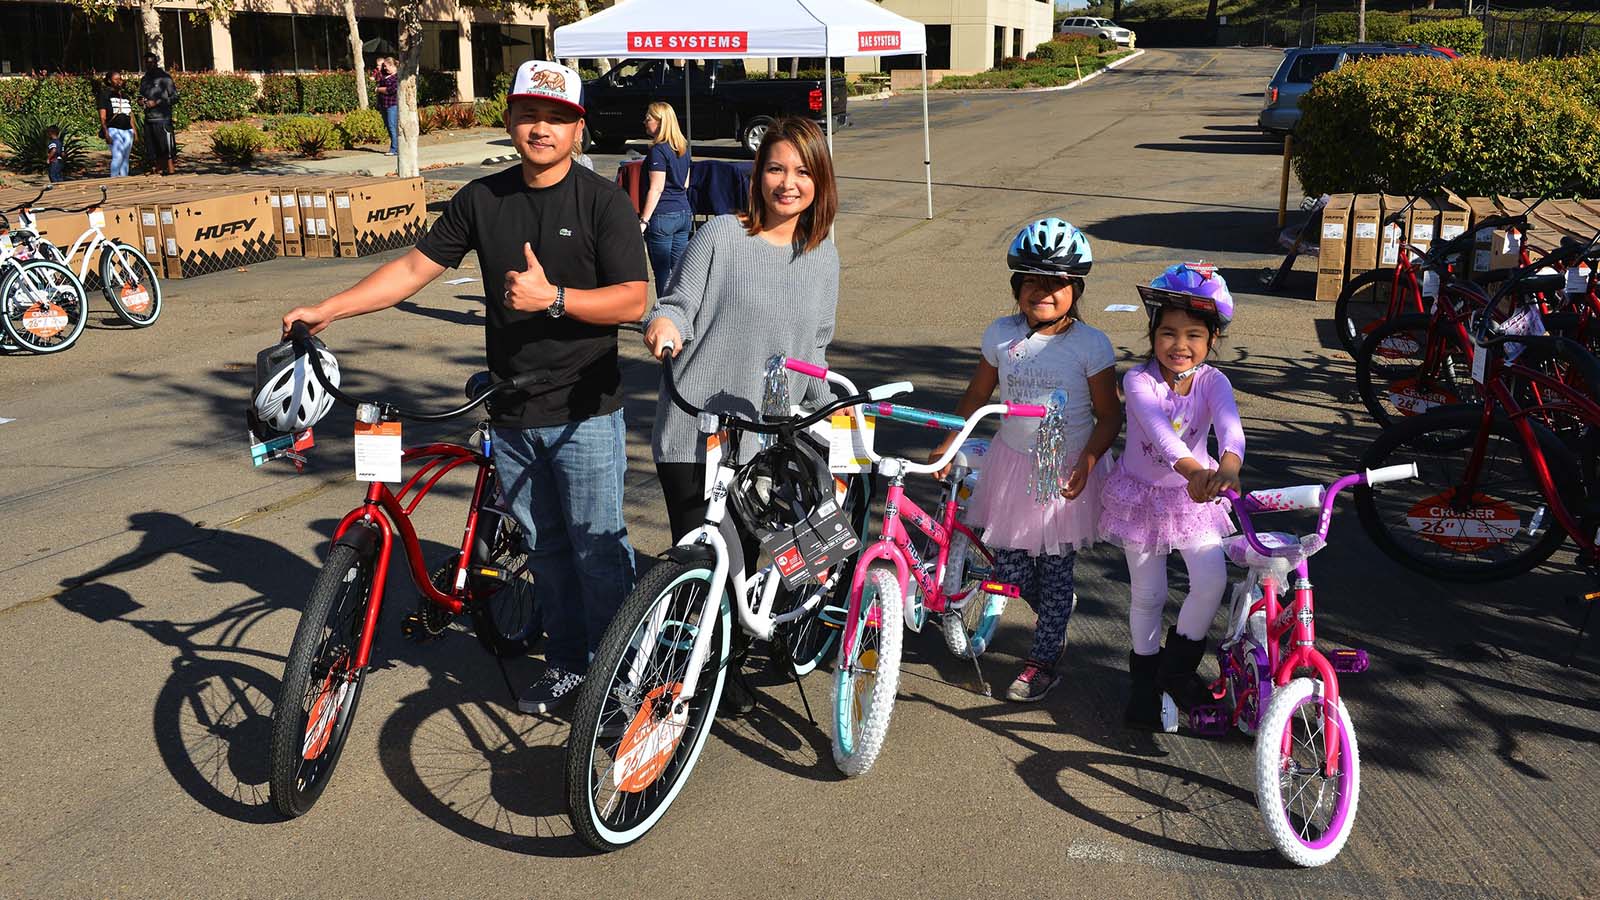 Mom and Dad standing side by side with their kids and their new bikes that they received at an Operation Homefront event.